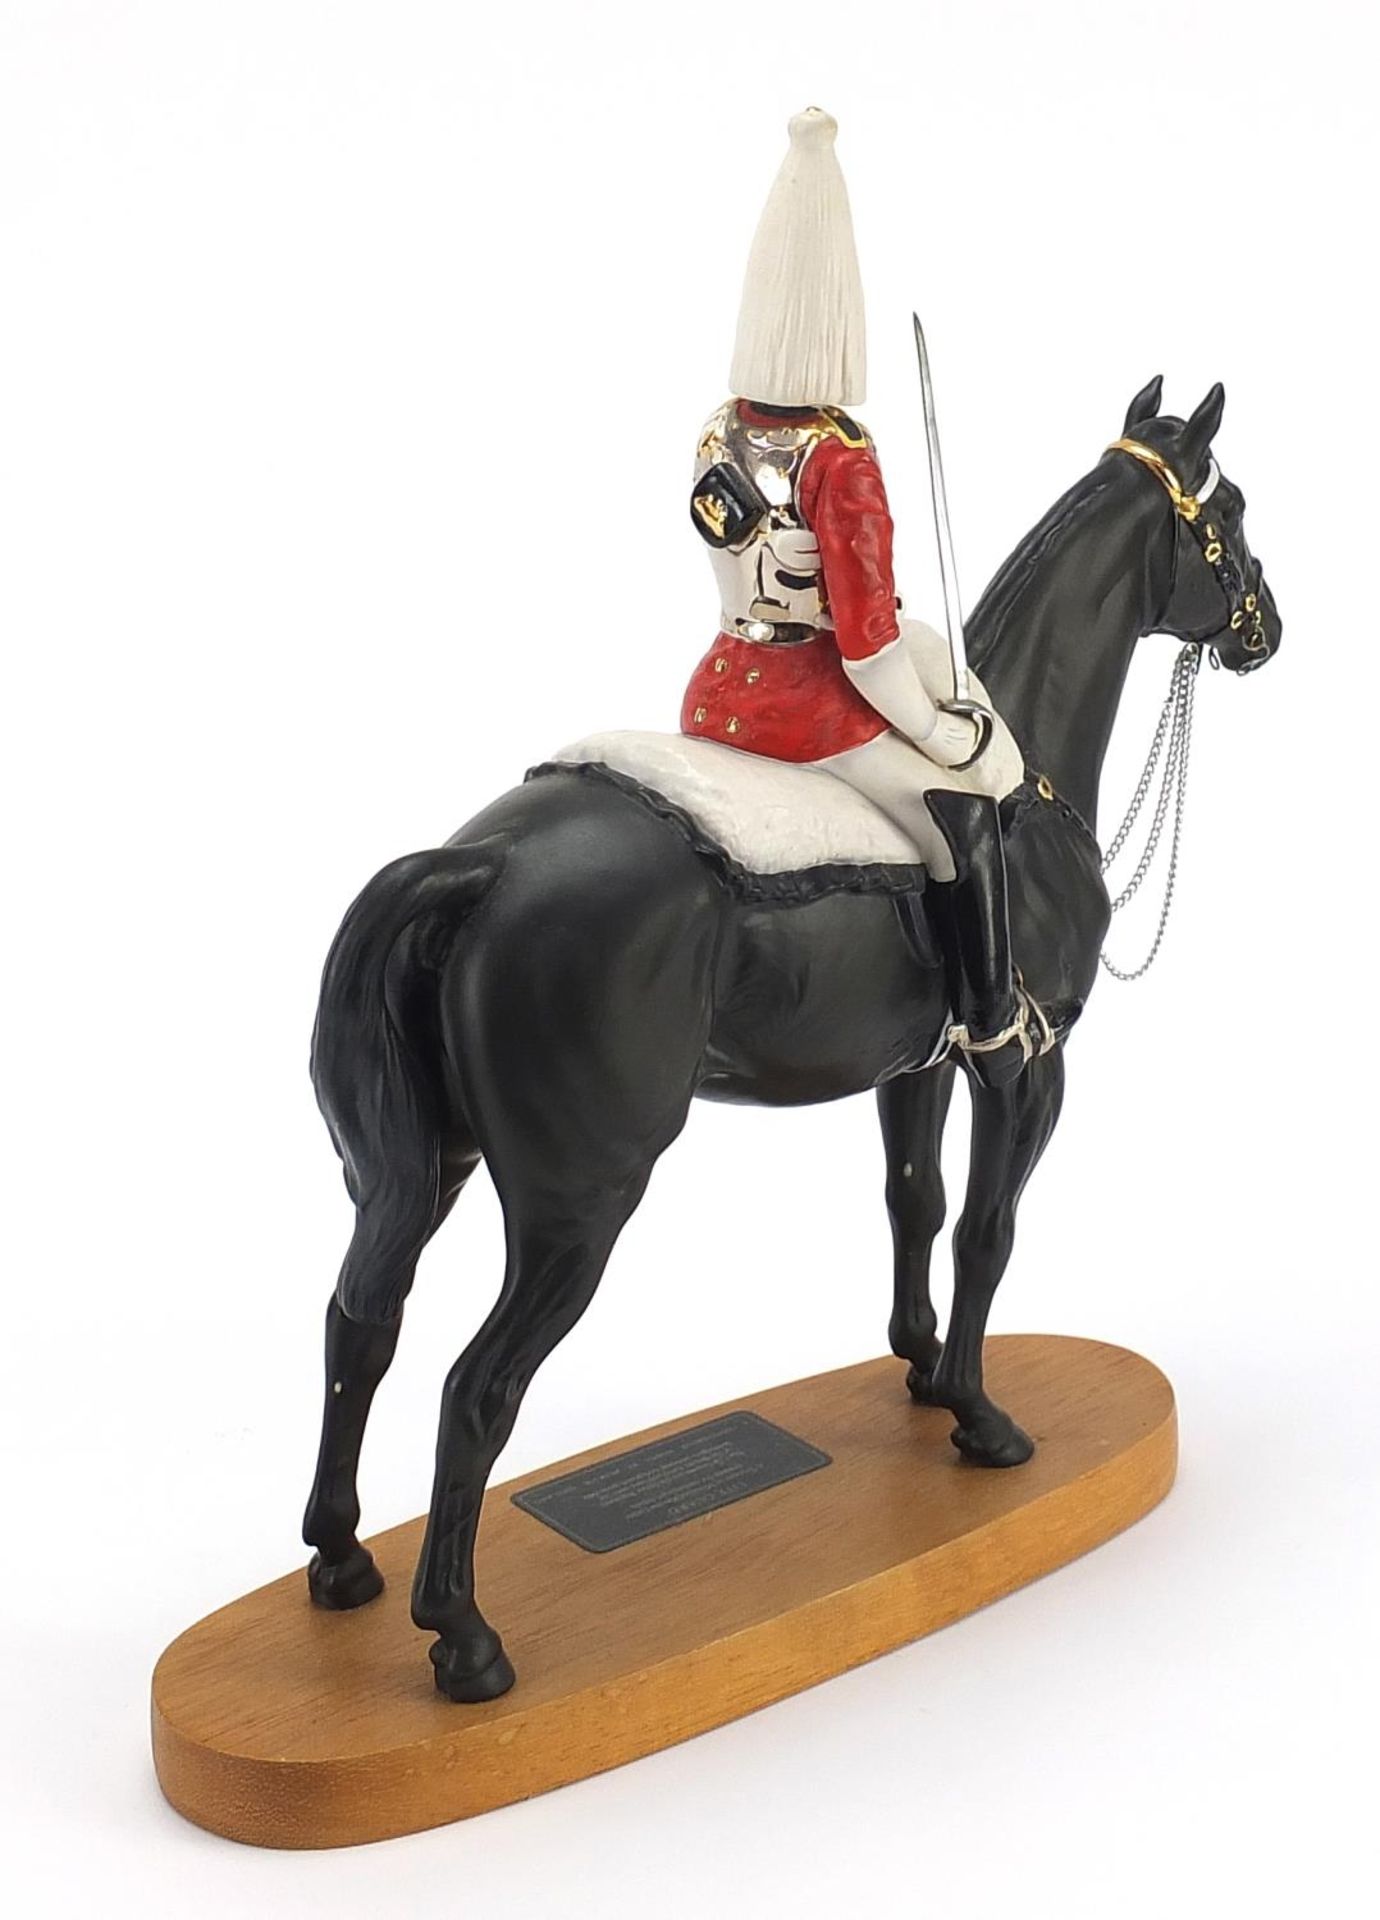 Beswick Connoisseur model of a Lifeguard on horseback raised on a wooden plinth base, 29cm in length - Image 2 of 4